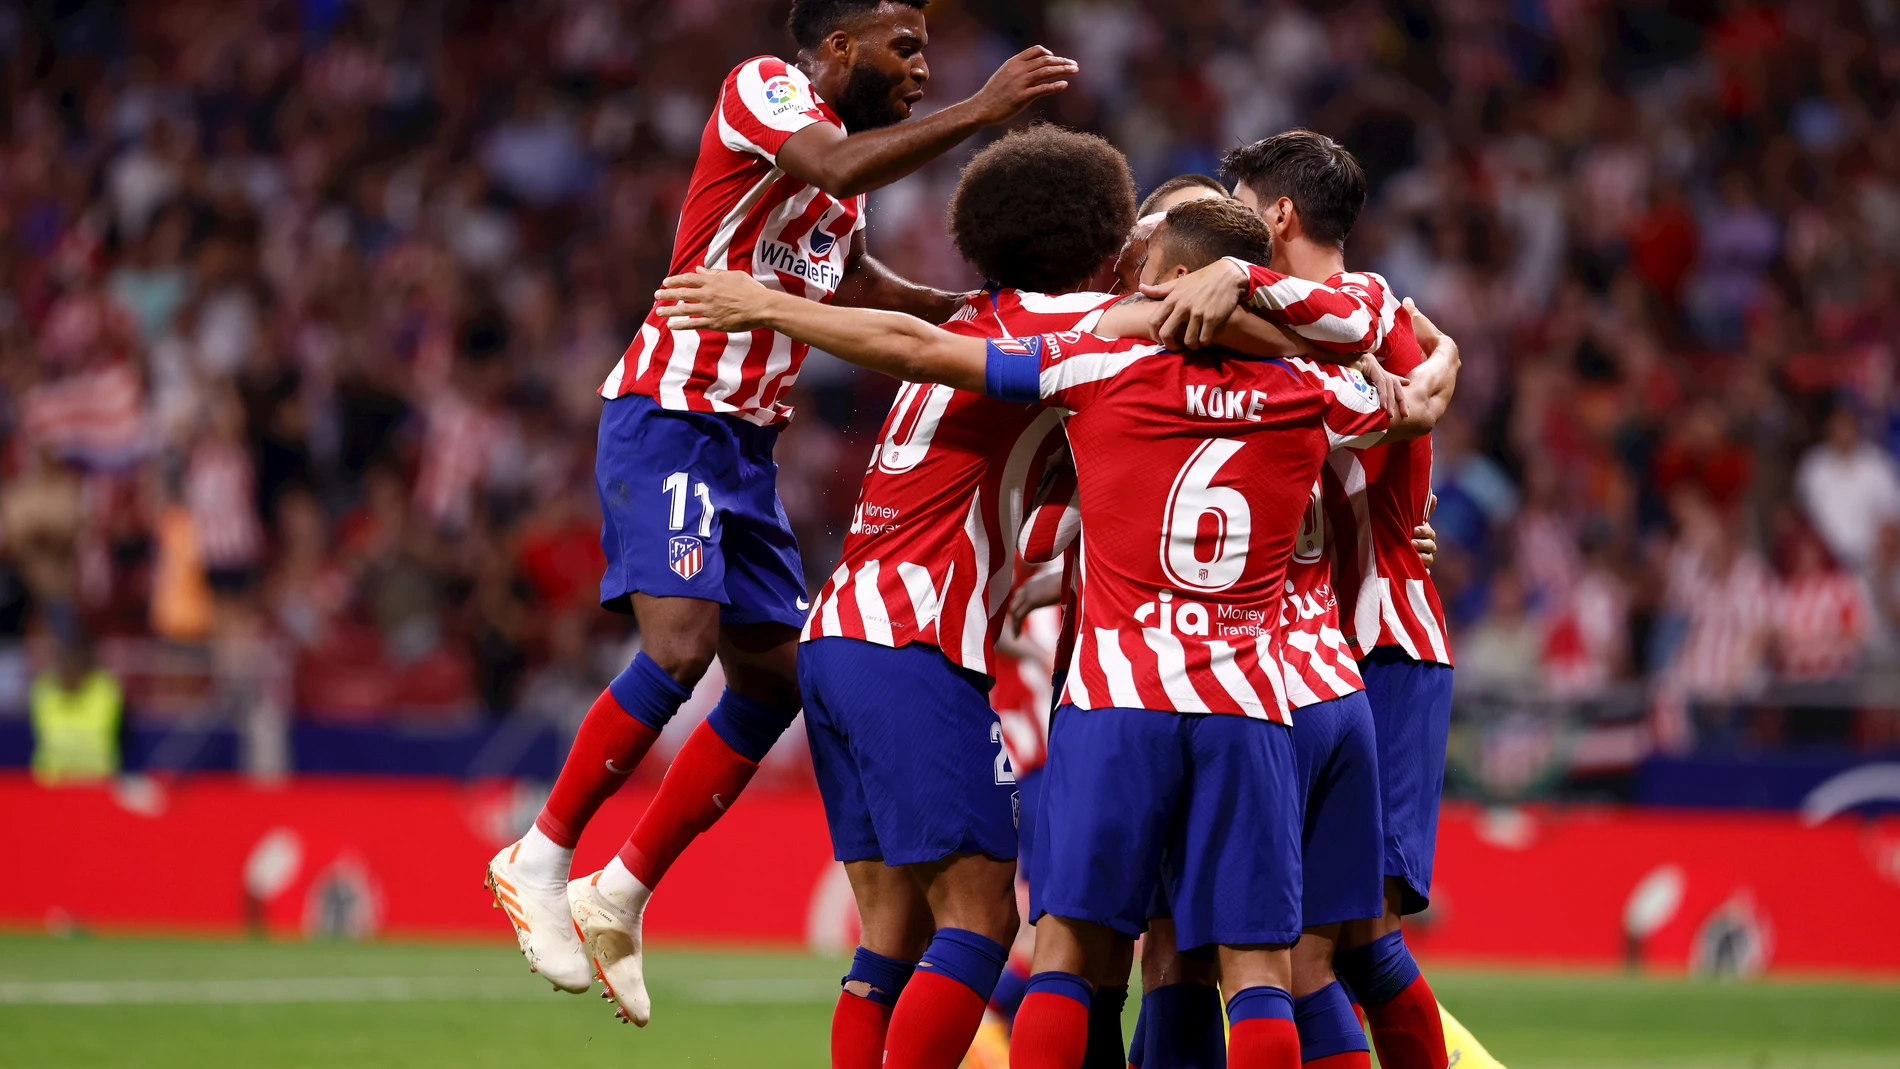 Yannick Carrasco of Atletico de Madrid celebrates a goal during the spanish league, La Liga Santander, football match played between Atletico de Madrid and Cadiz CF at Civitas Metropolitano stadium on May 03, 2023 in Madrid, Spain. Oscar J. Barroso / Afp7 03/05/2023 ONLY FOR USE IN SPAIN